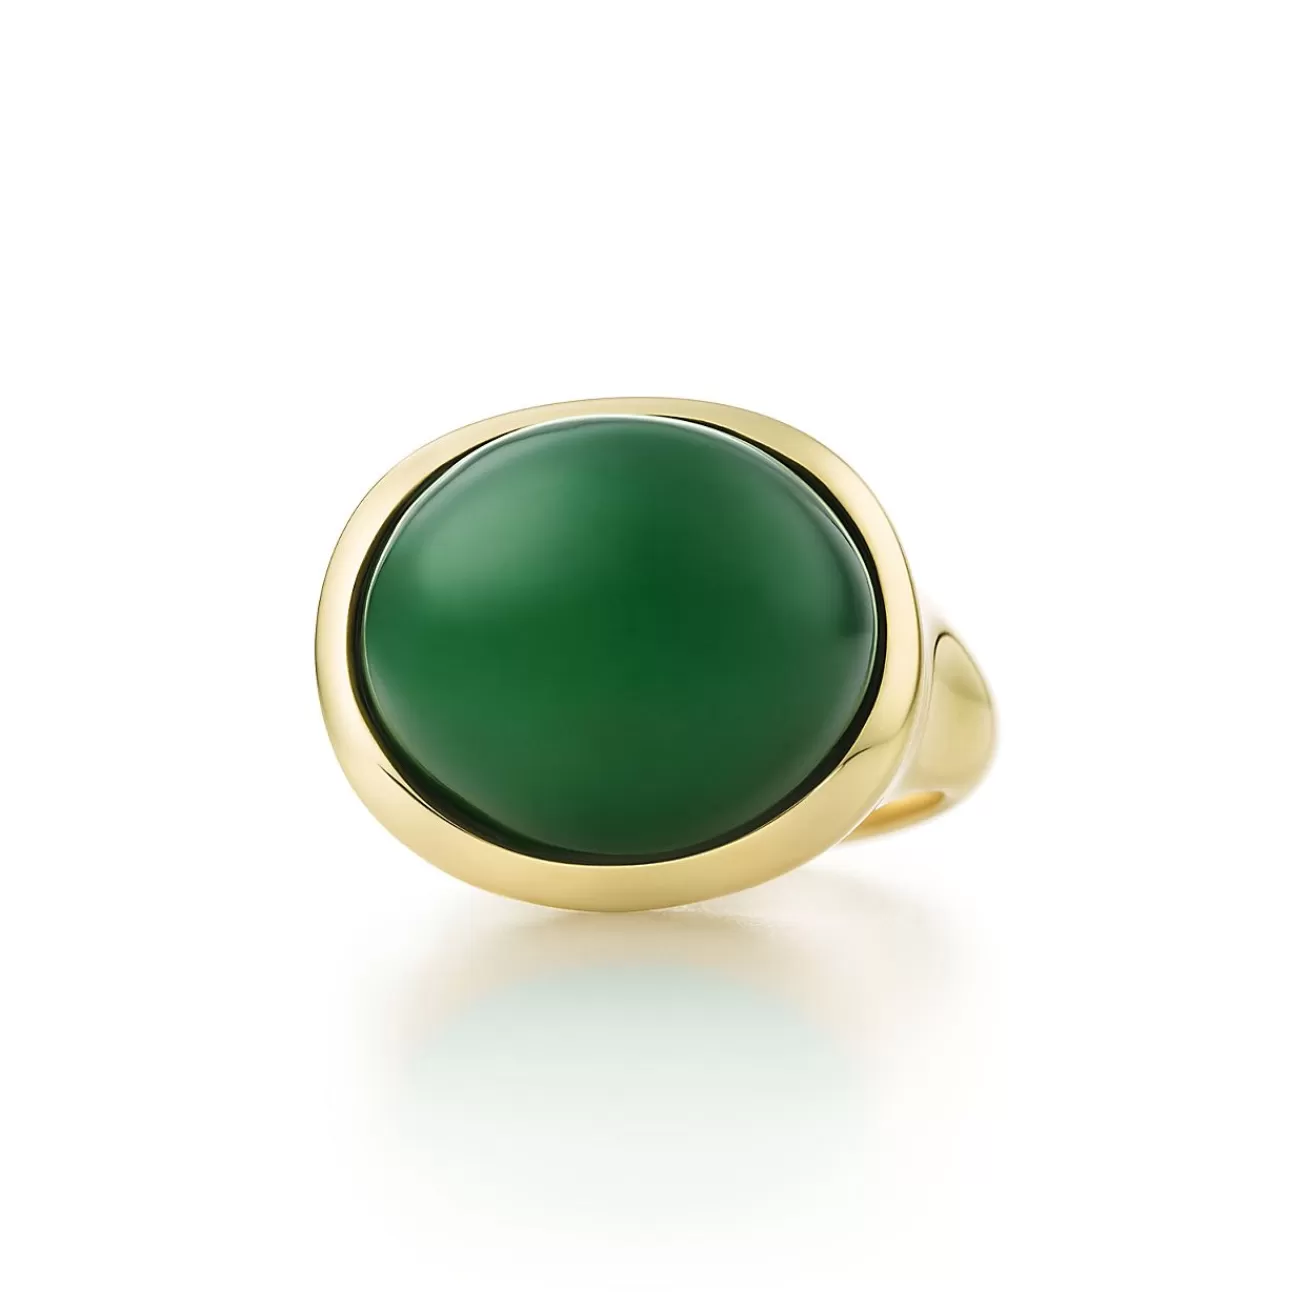 Tiffany & Co. Elsa Peretti® Cabochon ring in 18k gold with green jade, 15 mm wide. | ^ Rings | Gold Jewelry